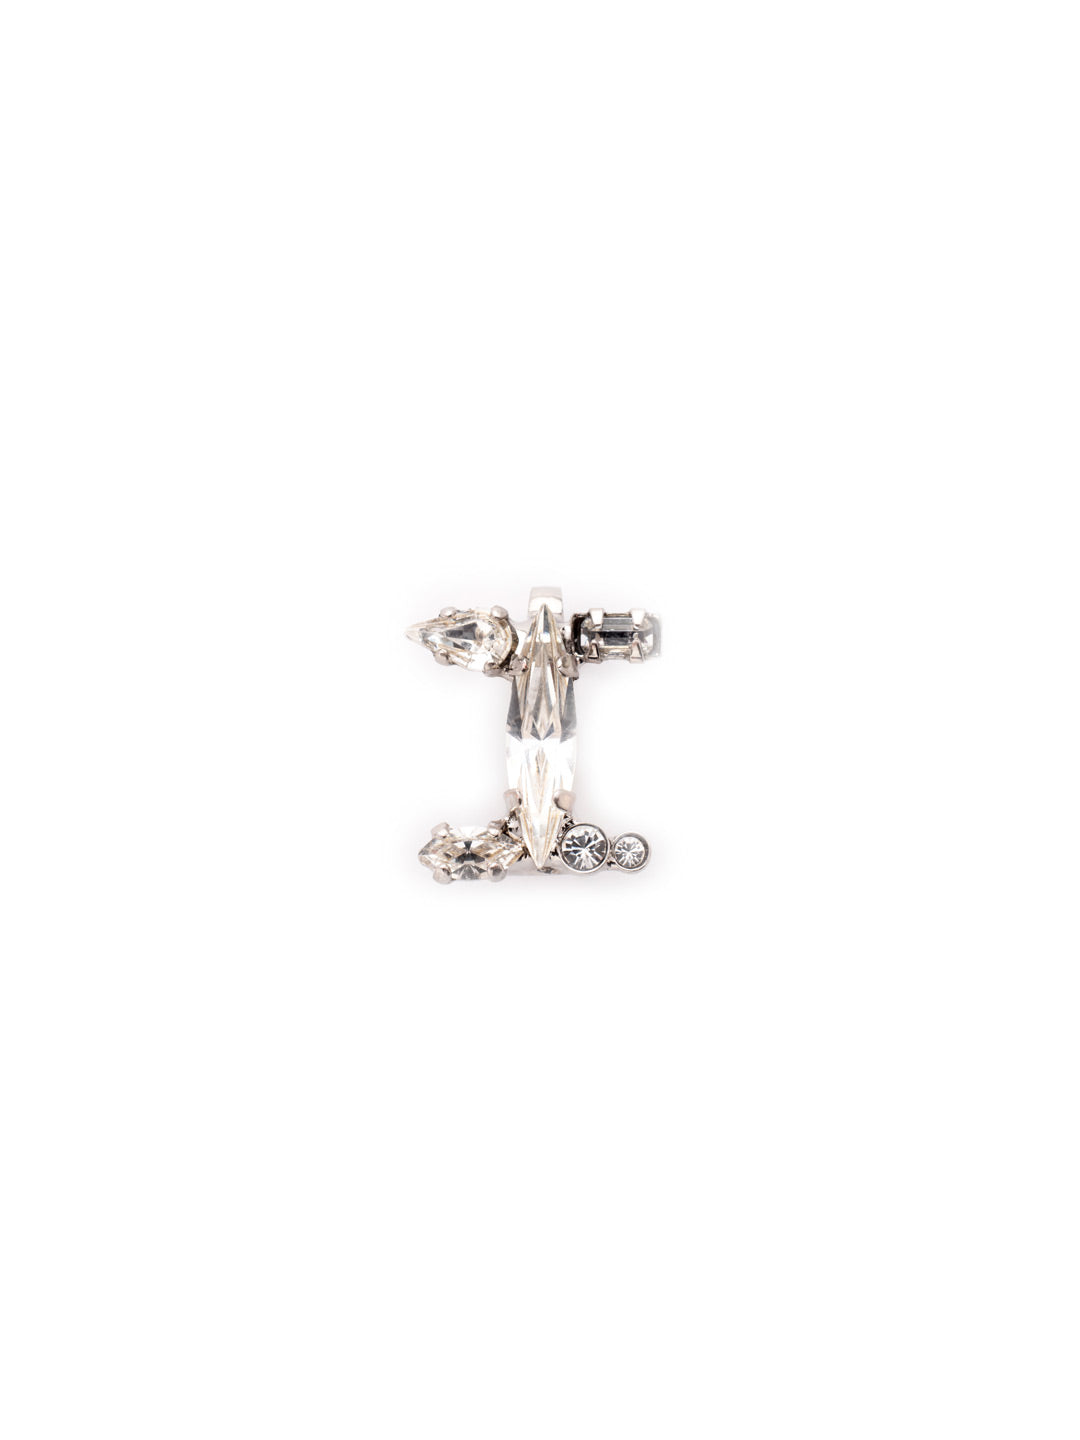 Product Image: Crystal Charm 'I' Charm Other Accessory